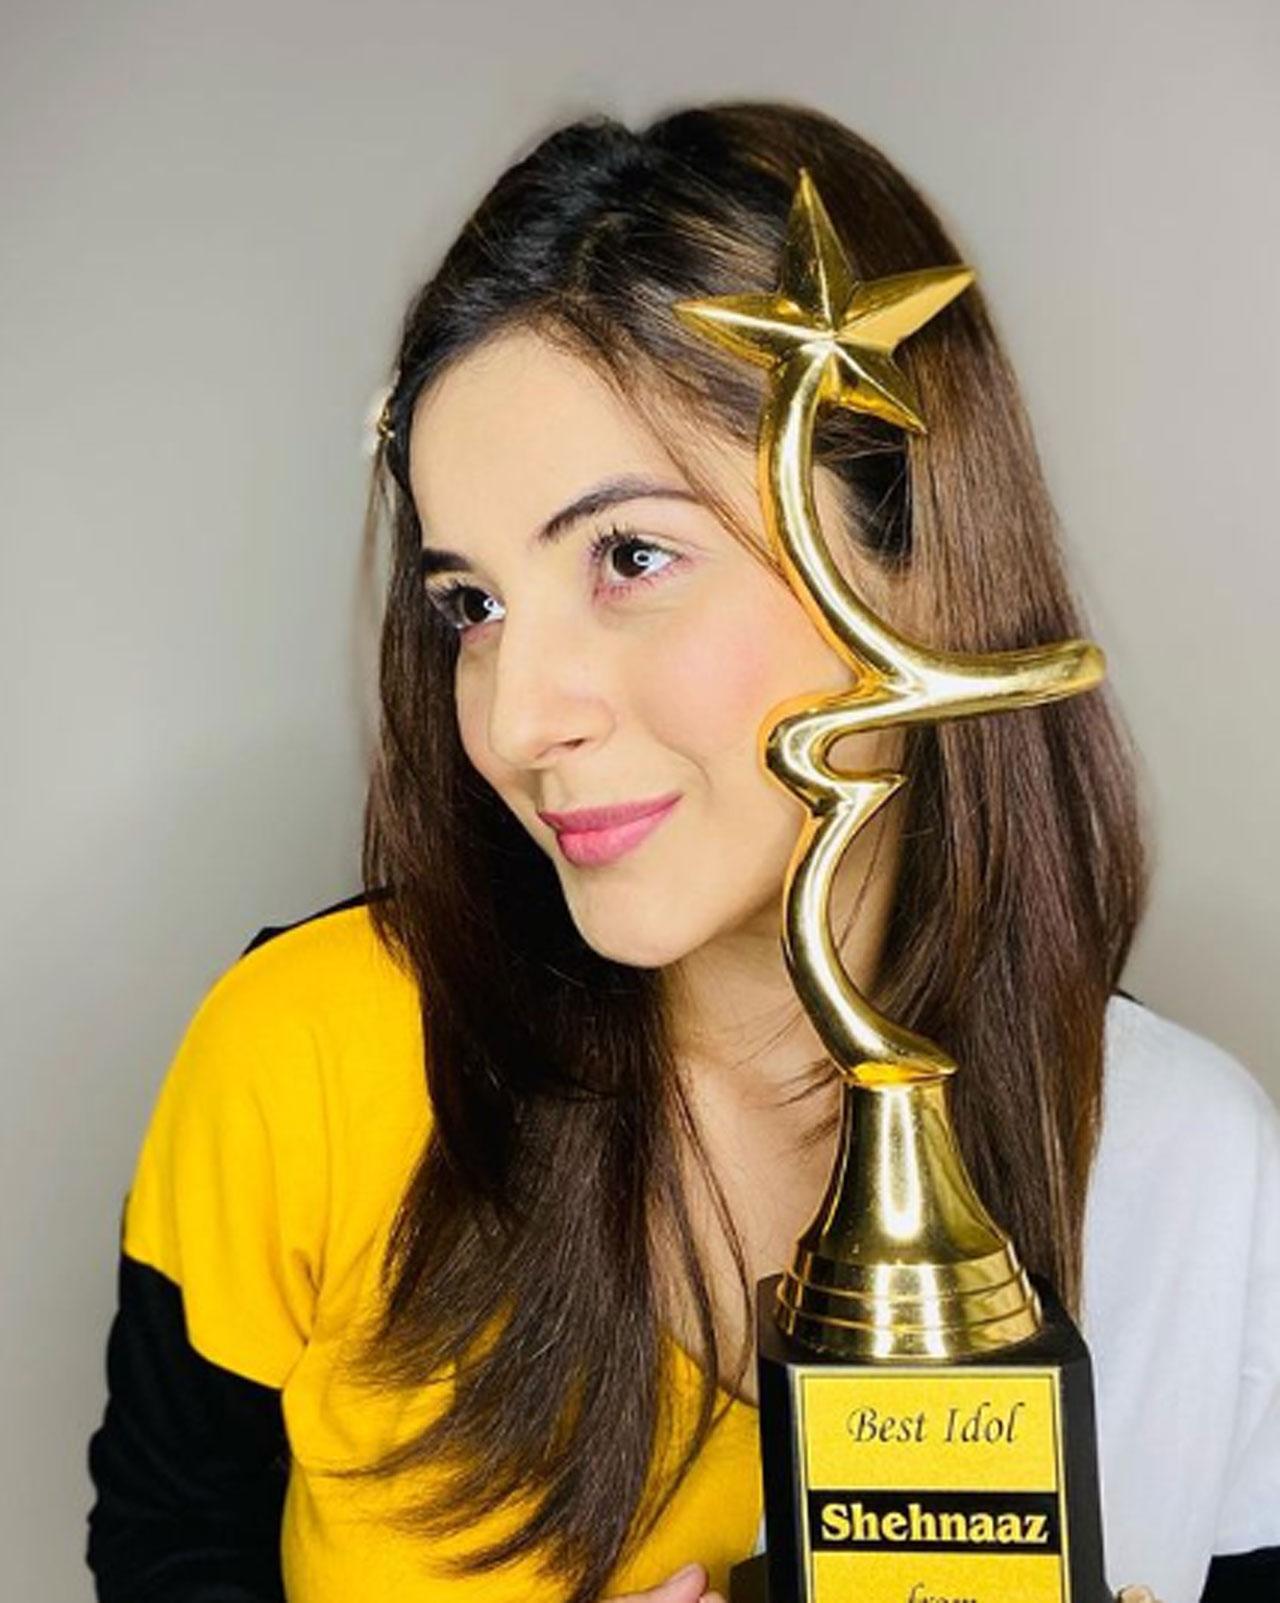 Did you know Shehnaaz Gill was given the Best Idol award by her fans? She shared multiple pictures on Instagram to thank them and wrote- 